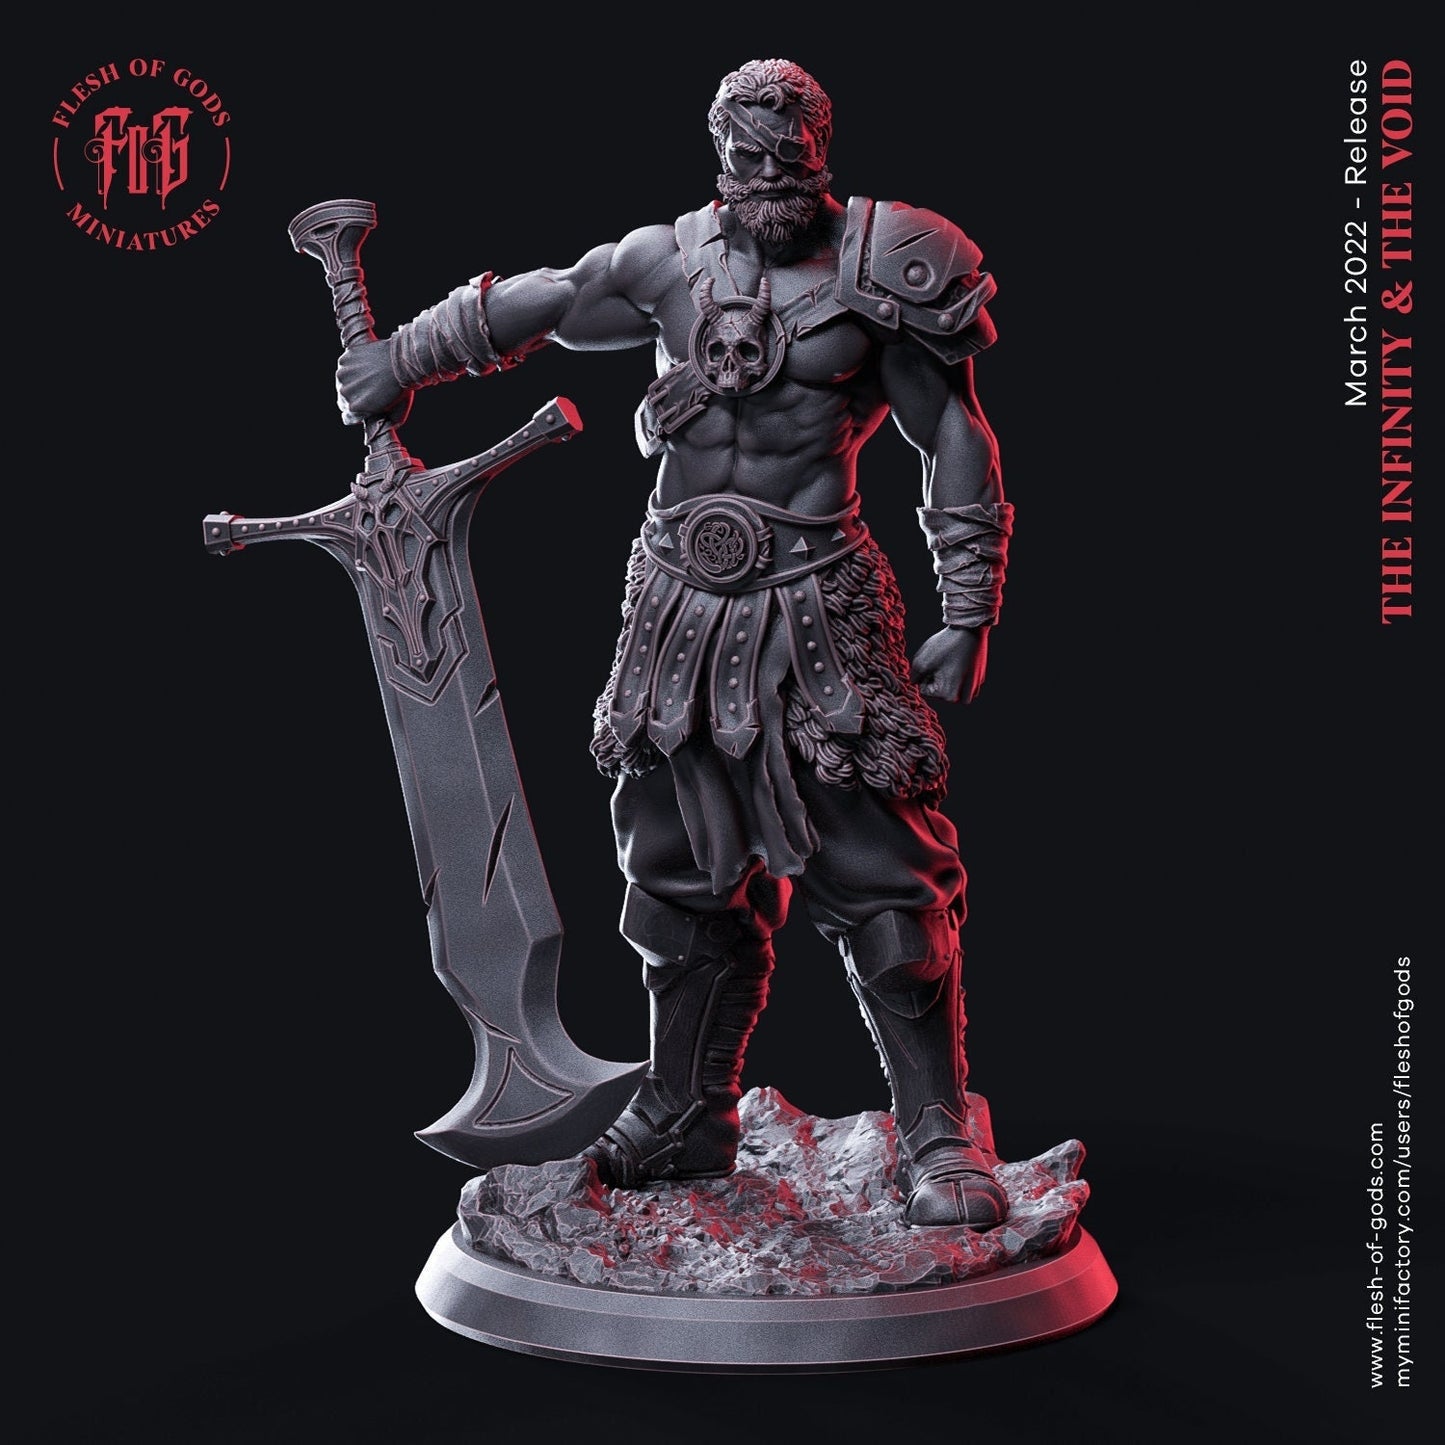 Kabel the Swordsman | Flesh of Gods | Hero | 3D Printed Resin Miniature | Dungeons and Dragons | Pathfinder | Tabletop Role Playing | D&D